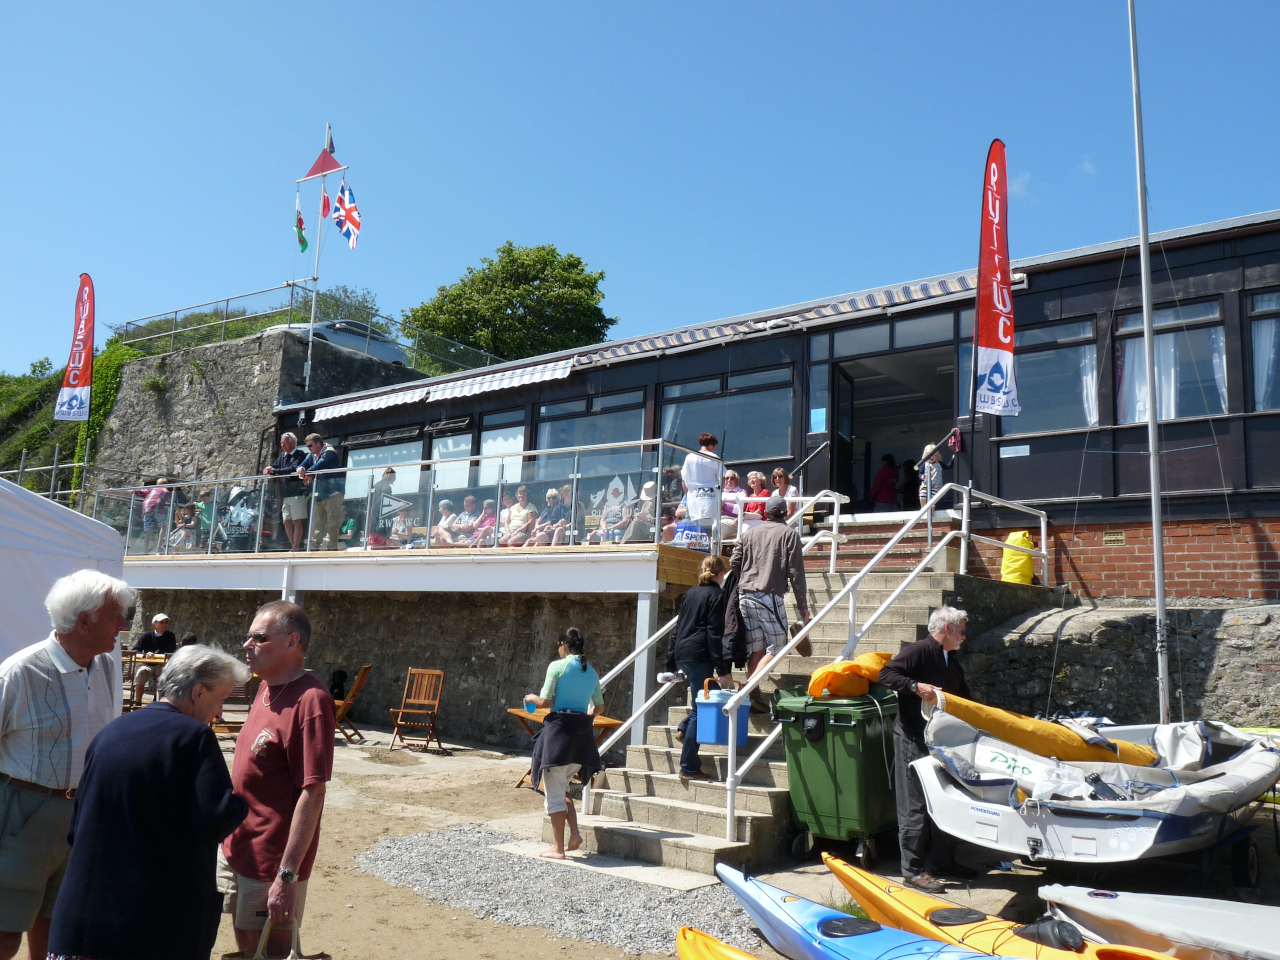 A sailing club clubhouse on a sunny day